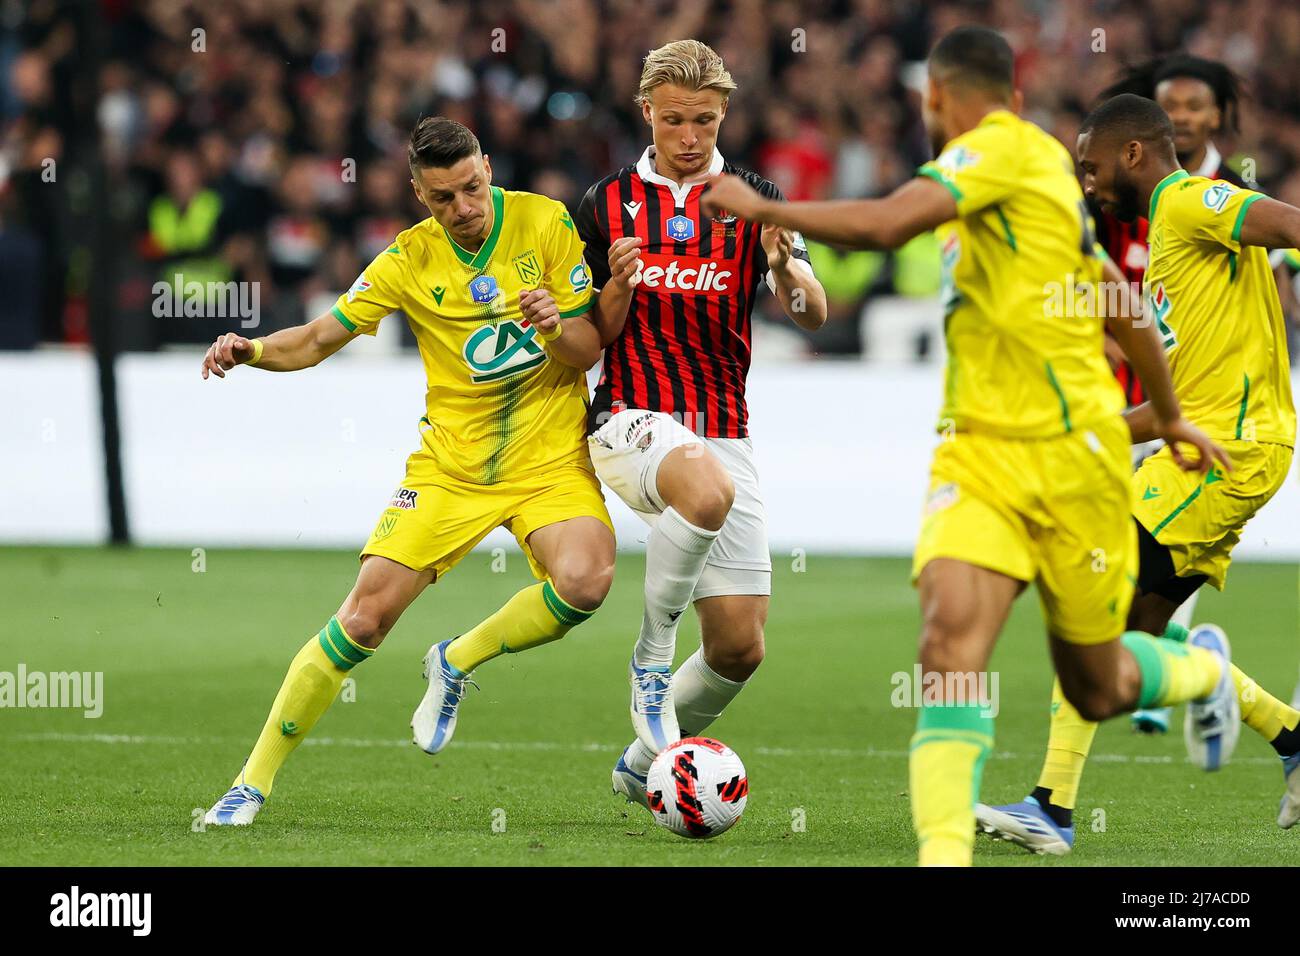 SAINT-DENIS, FRANCE - MAY 7: Andrei Girotto of FC Nantes, Kasper Dolberg of  OGC Nice during the Coupe de France match between OGC Nice and FC Nantes at  Stade de France on